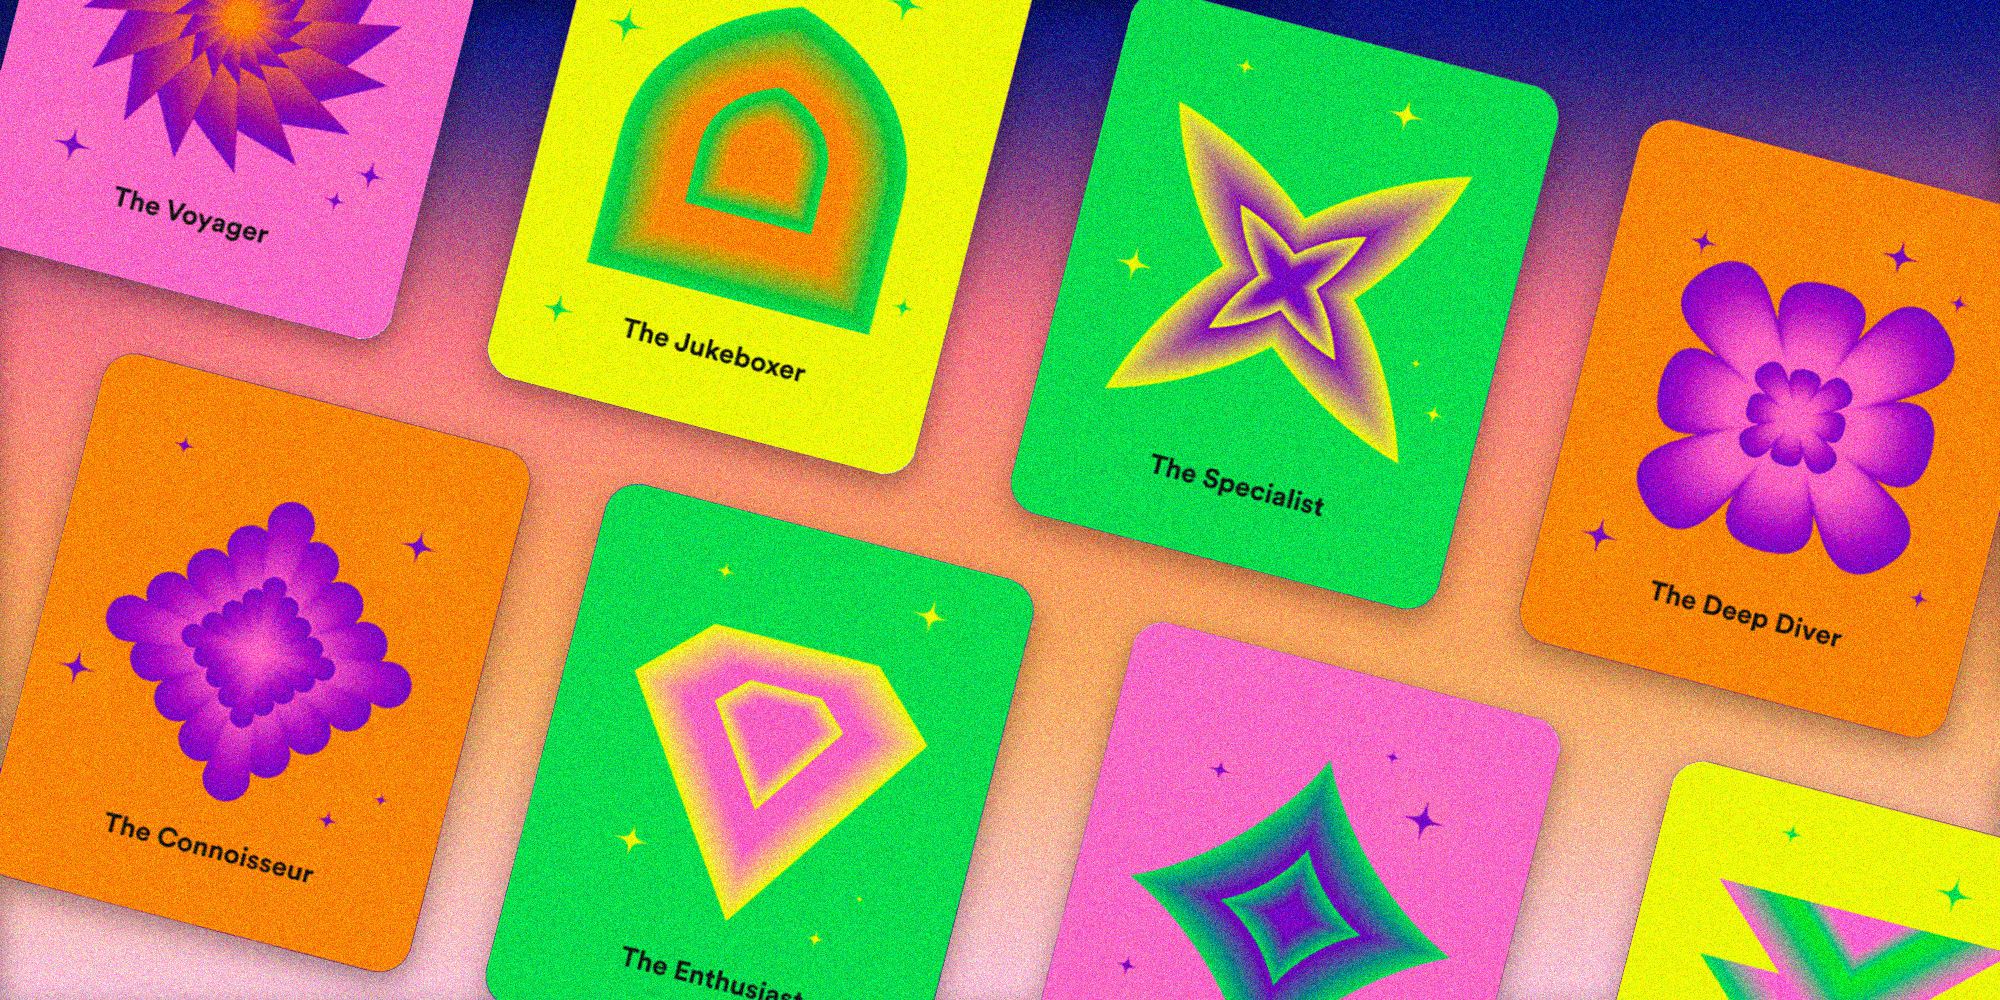 Spotify Wrapped Listening Personality cards in green, orange, yellow, and pink on a gradient pink and purple background